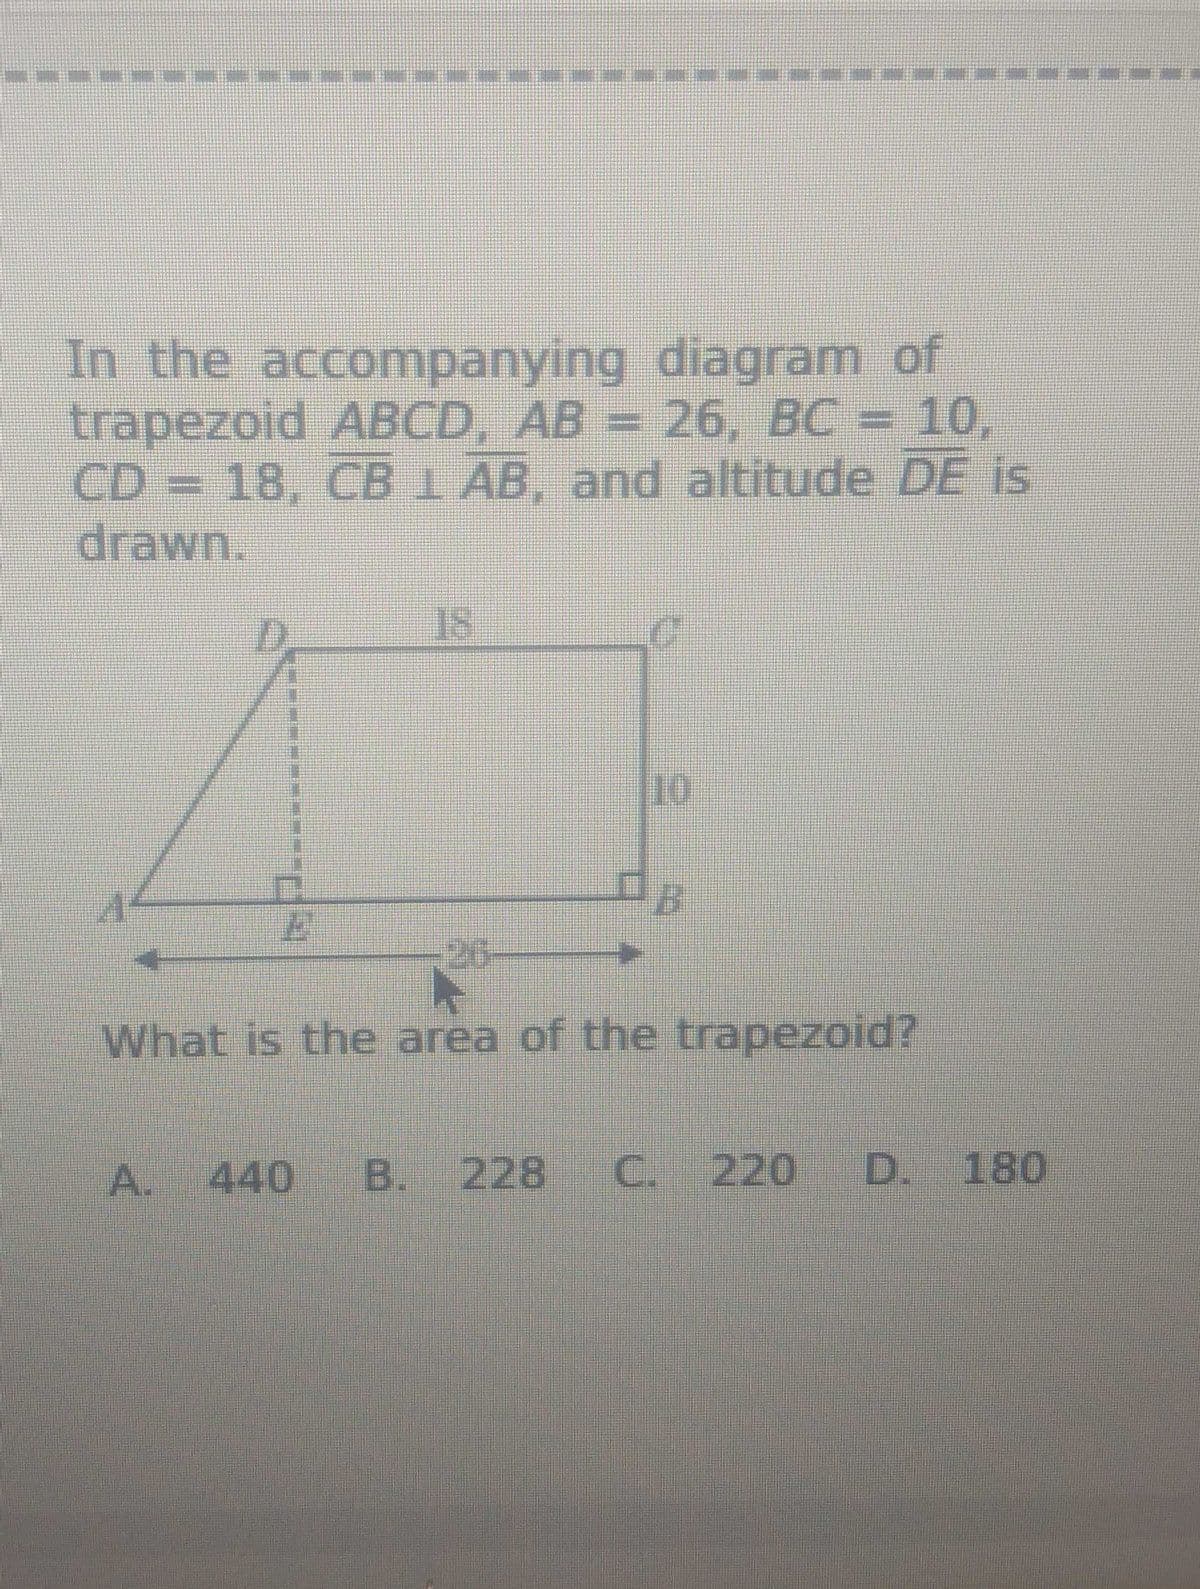 In the accompanying diagram of
trapezoid ABCD, AB = 26, BC = 10,
CD = 18, CB 1 AB, and altitude DE is
drawn.
26
What is the area of the trapezoid?
A. 440 B. 228
C. 220 D. 180
